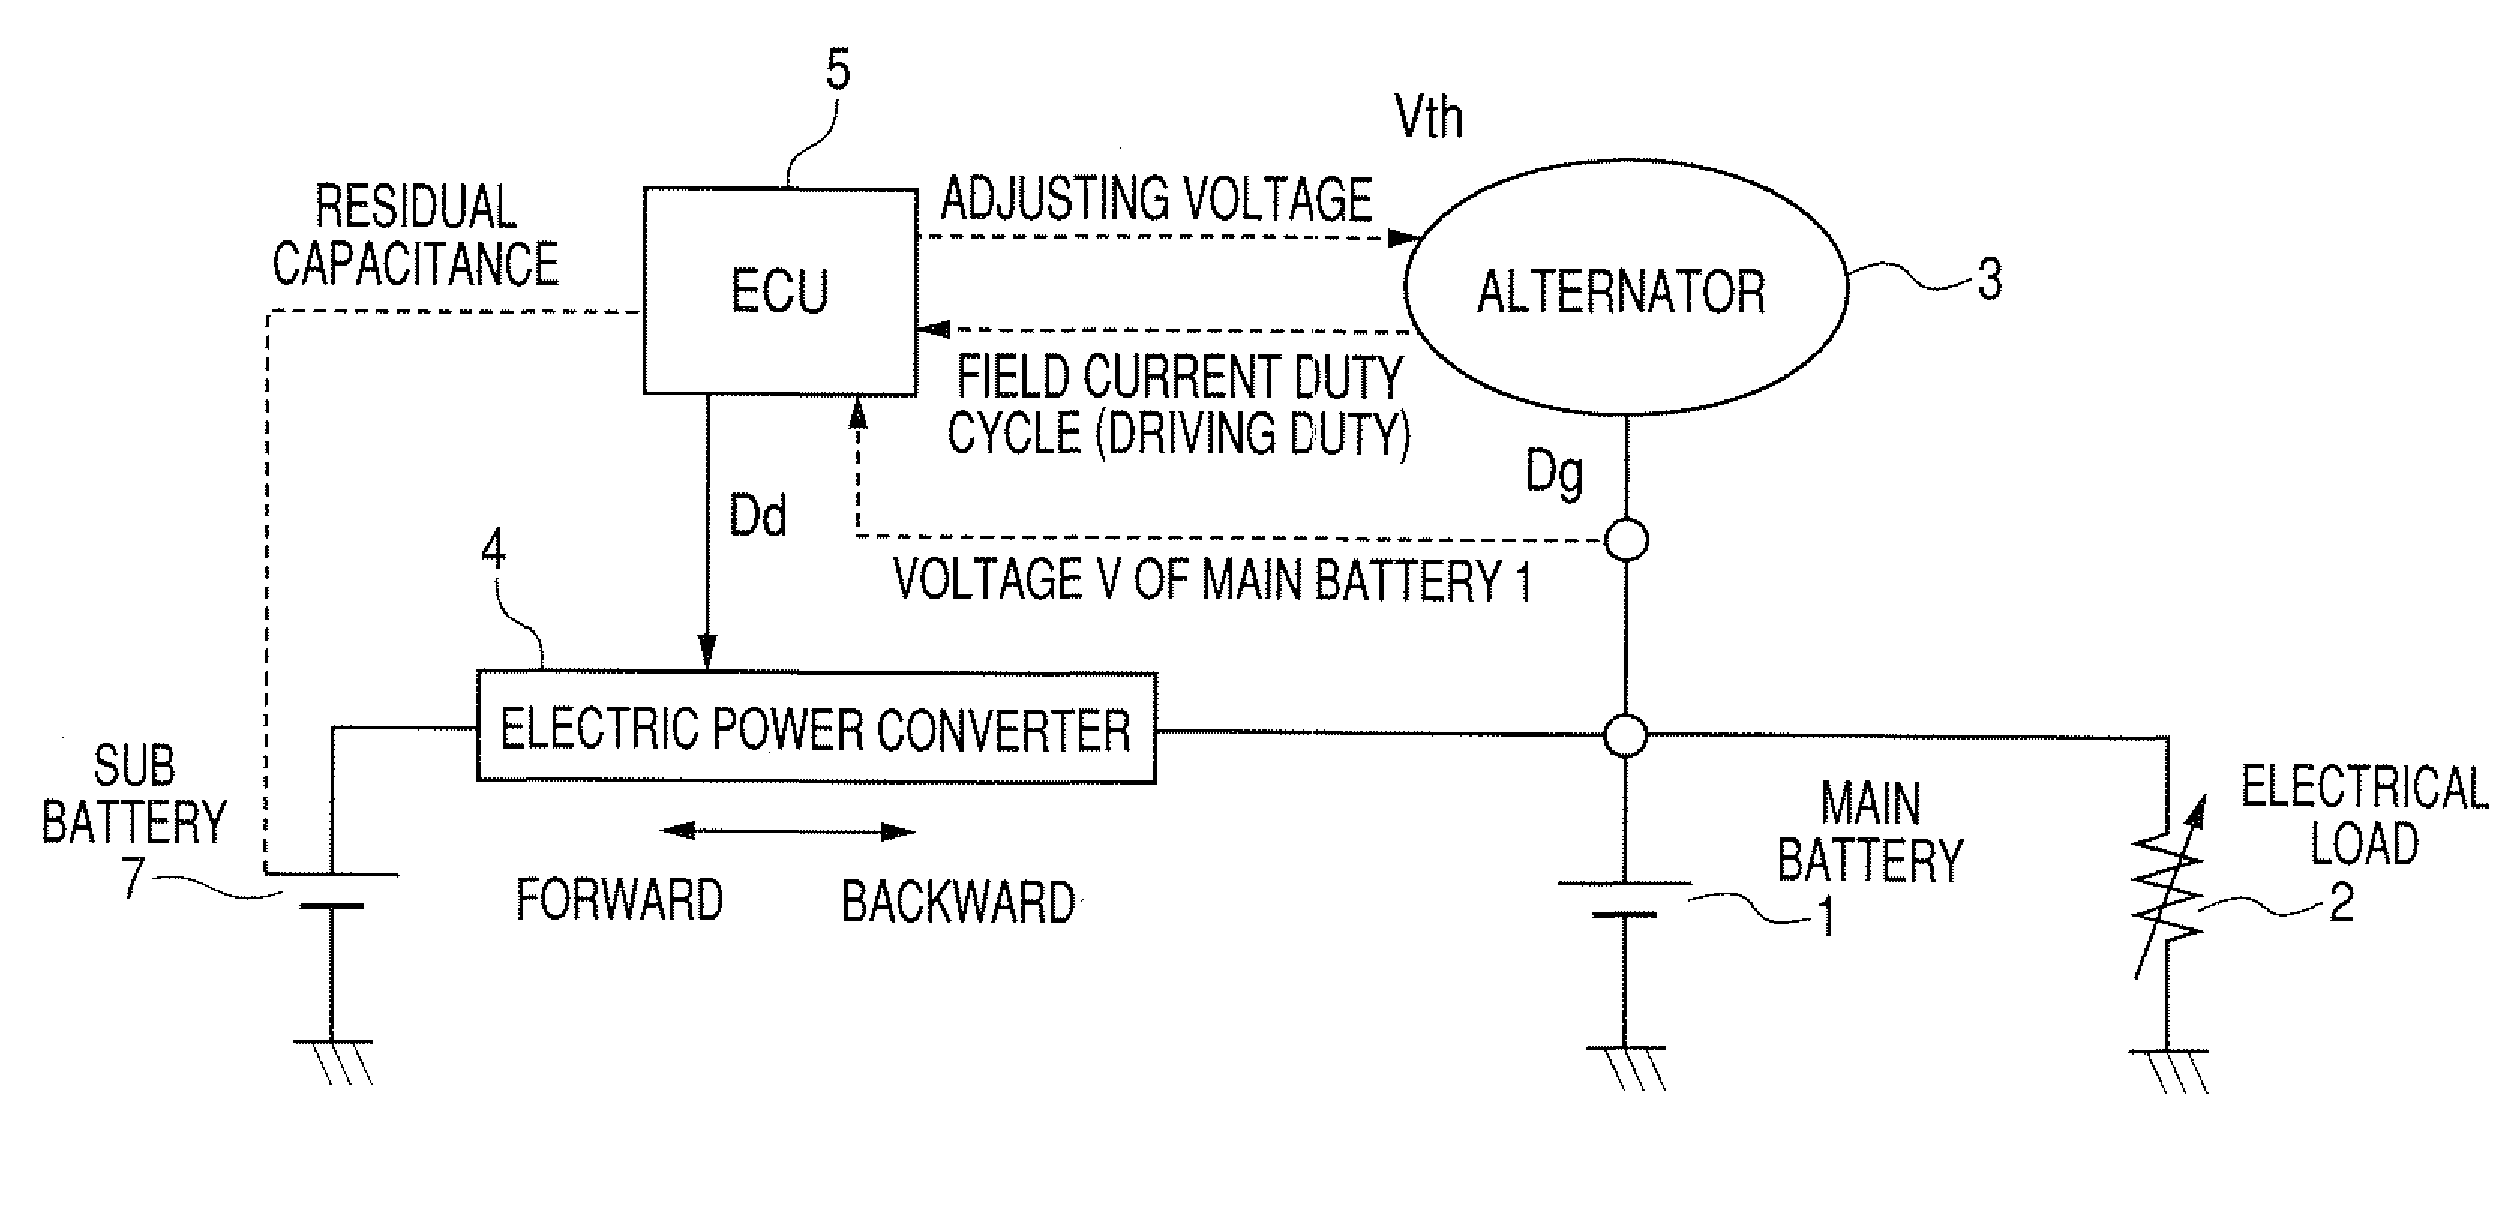 Electric power system for vehicle